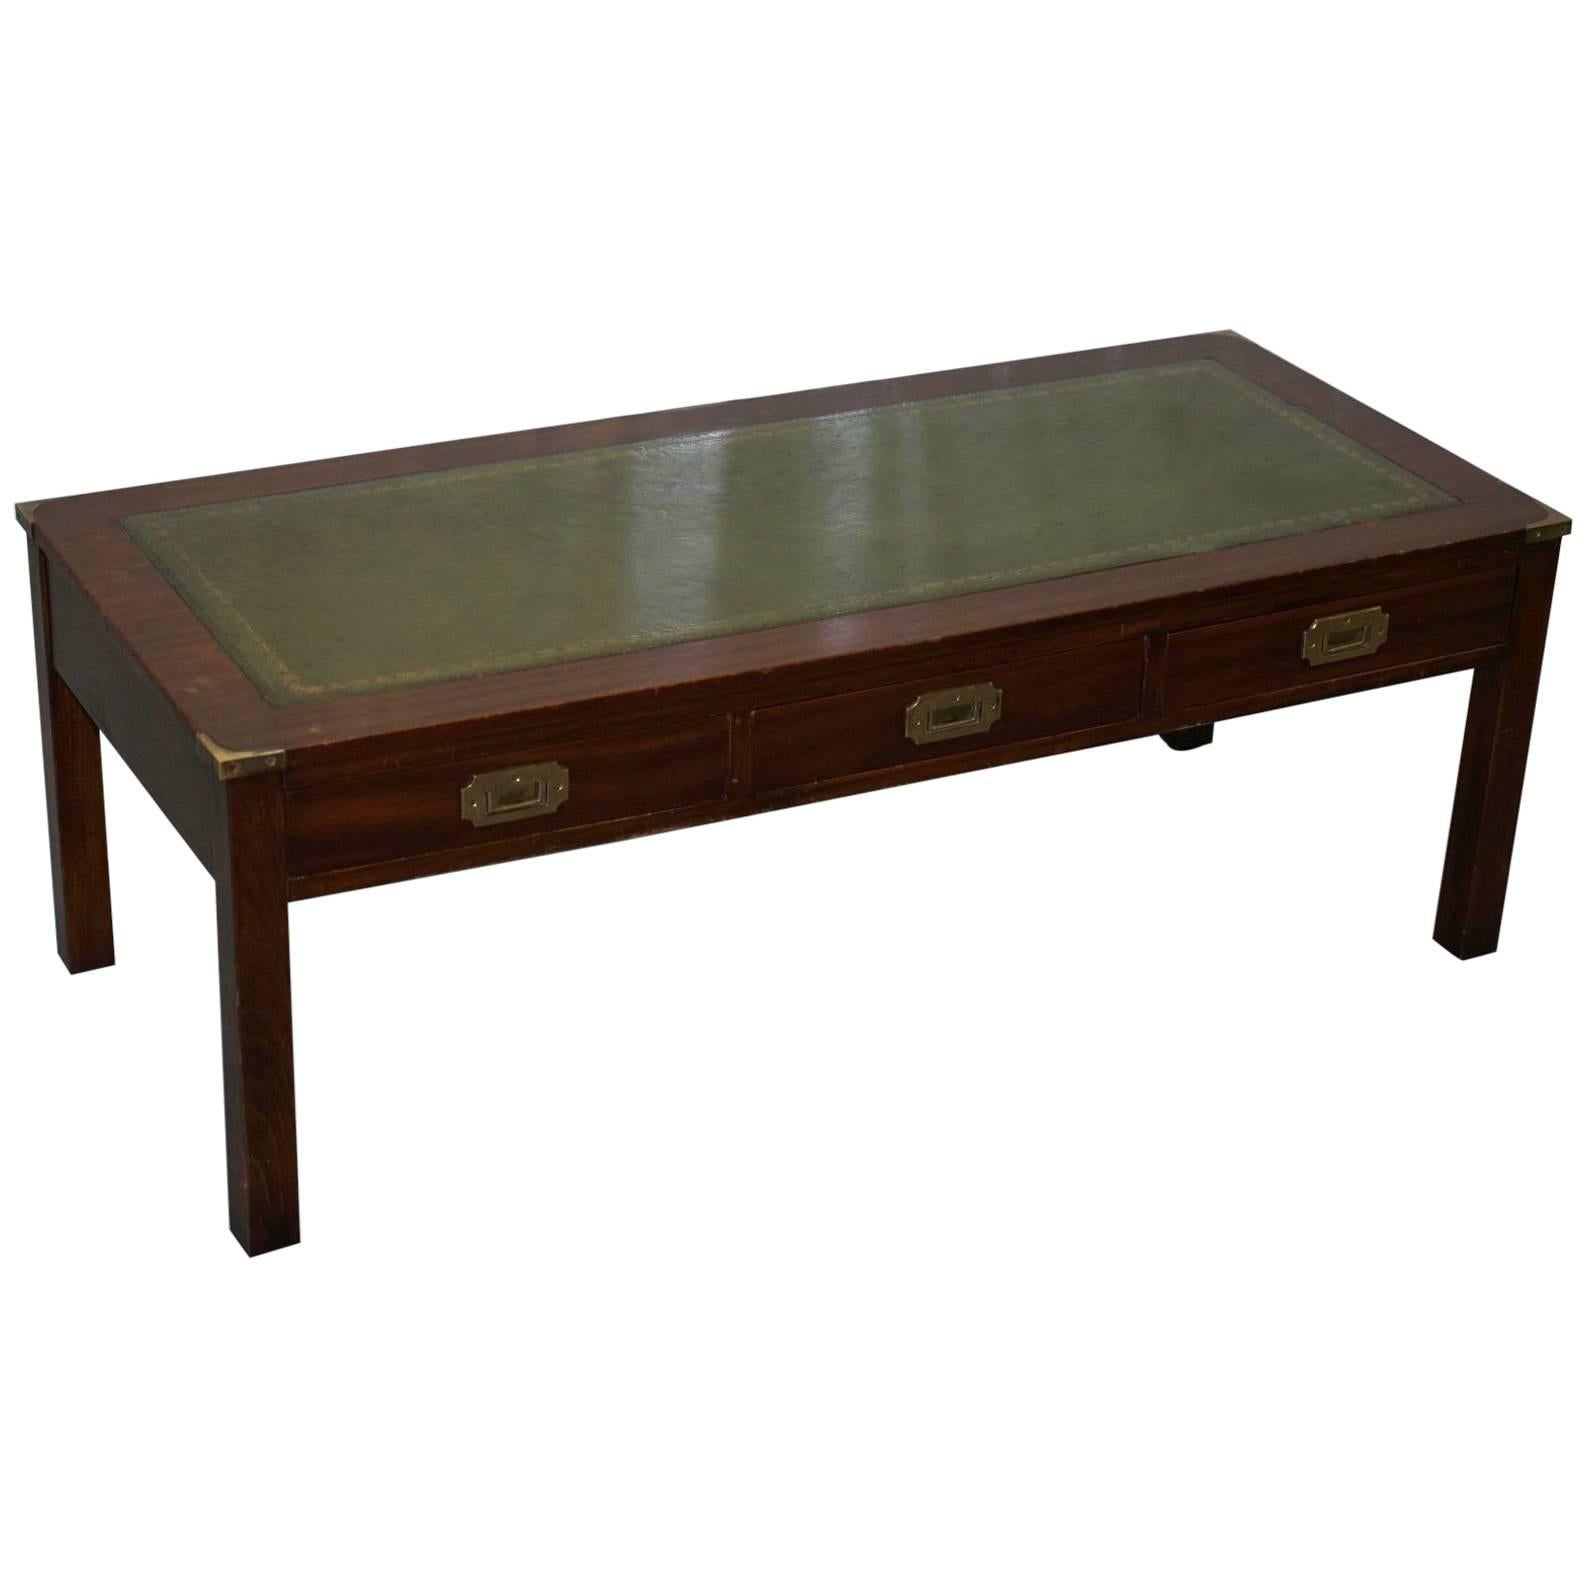 Military Campaign Coffee Table with Green Leather Surface and Drawers